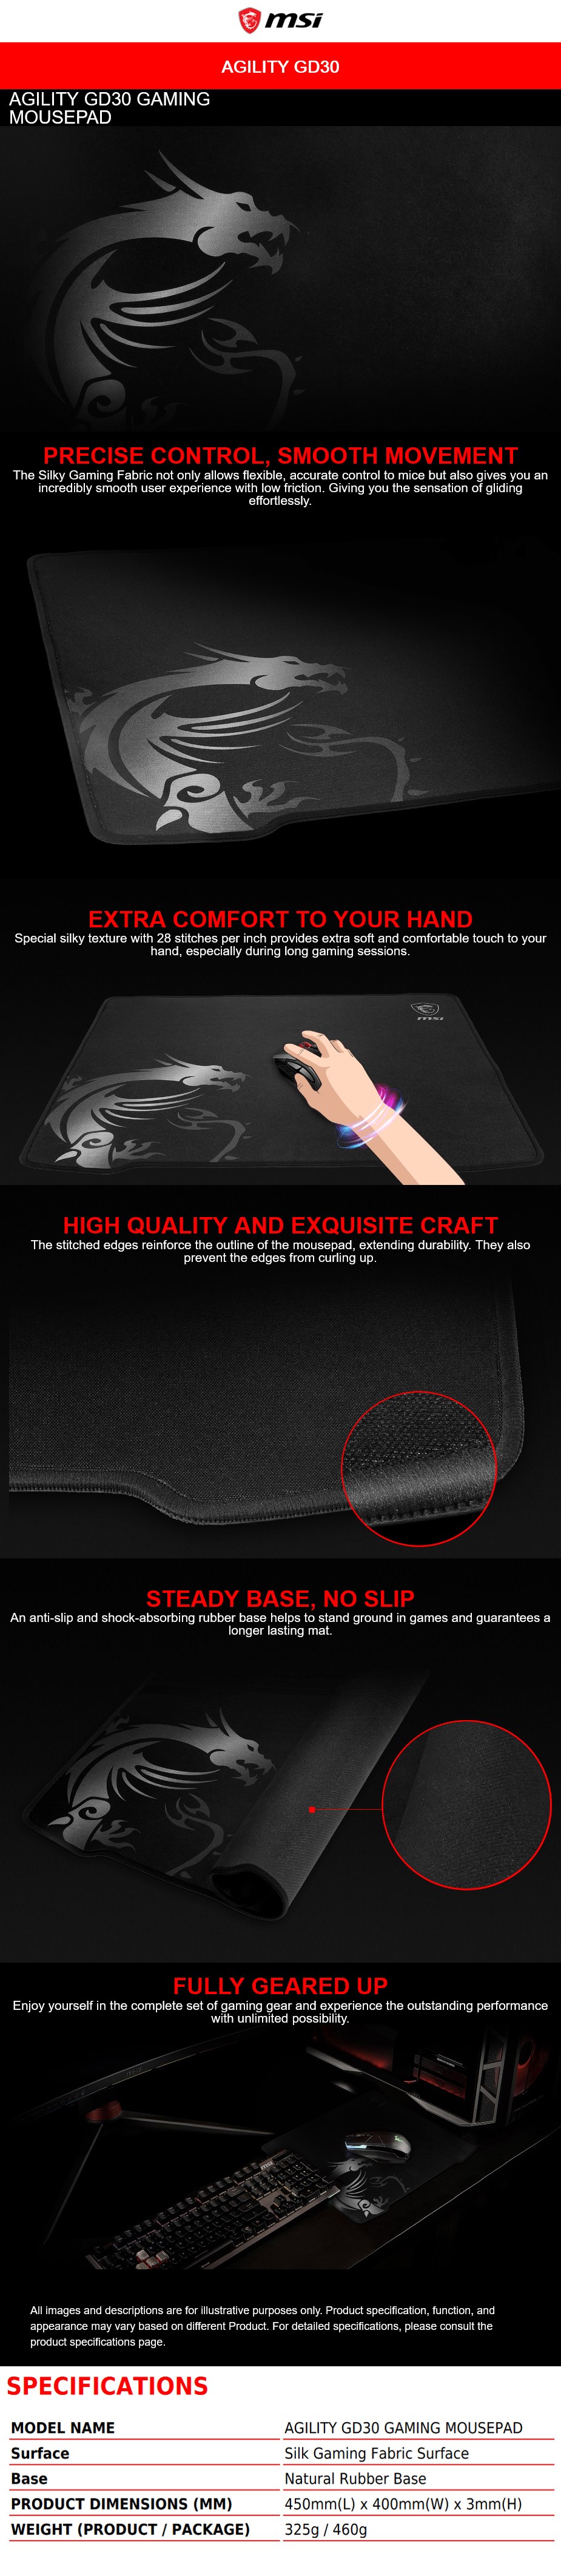 A large marketing image providing additional information about the product MSI Agility GD30 Mousemat - Additional alt info not provided